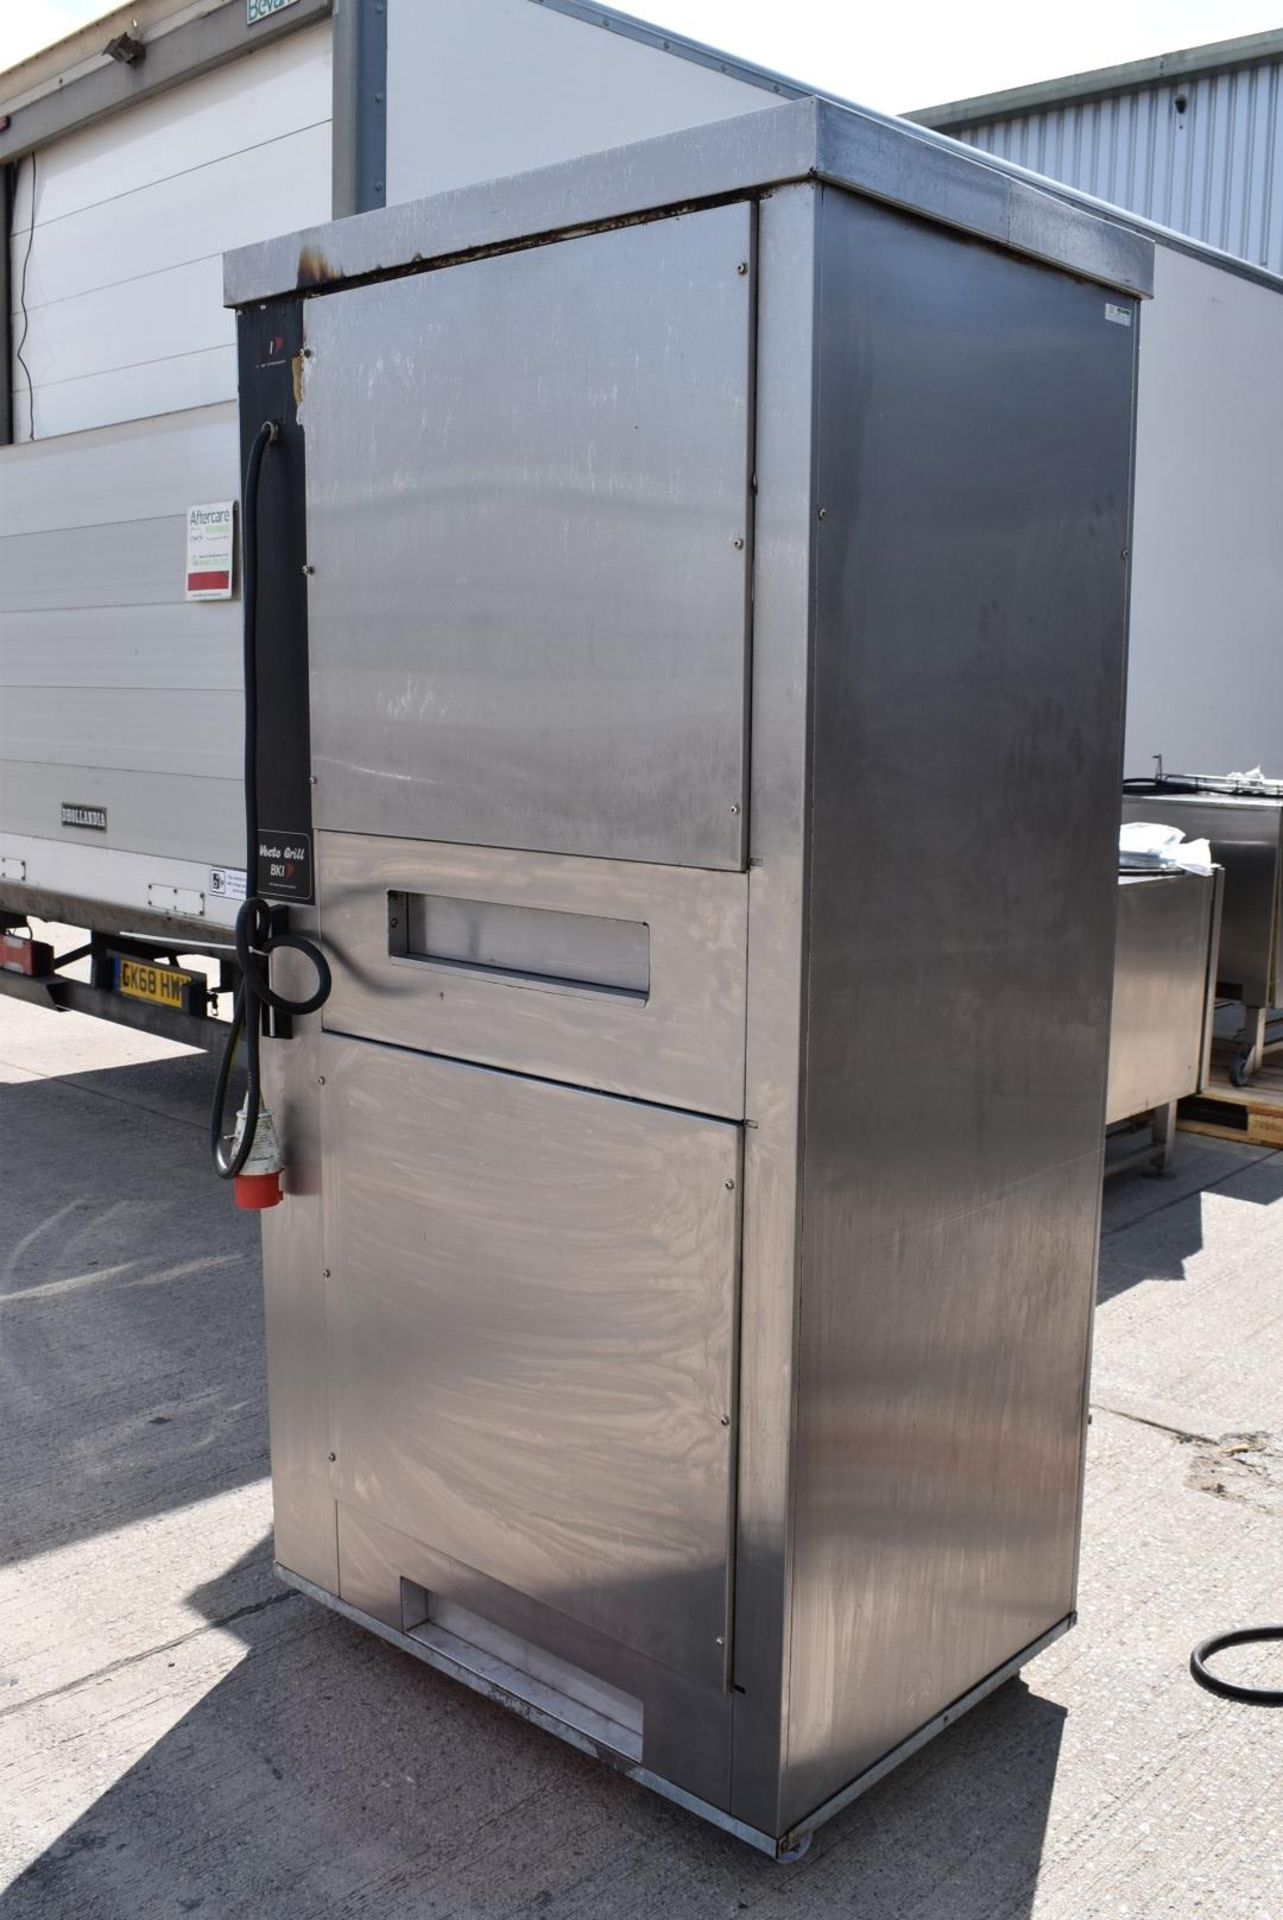 1 x BKI BBQ King Commercial Double Rotisserie Chicken Oven With Stand - Type VGUK16 - 3 Phase - Image 11 of 21